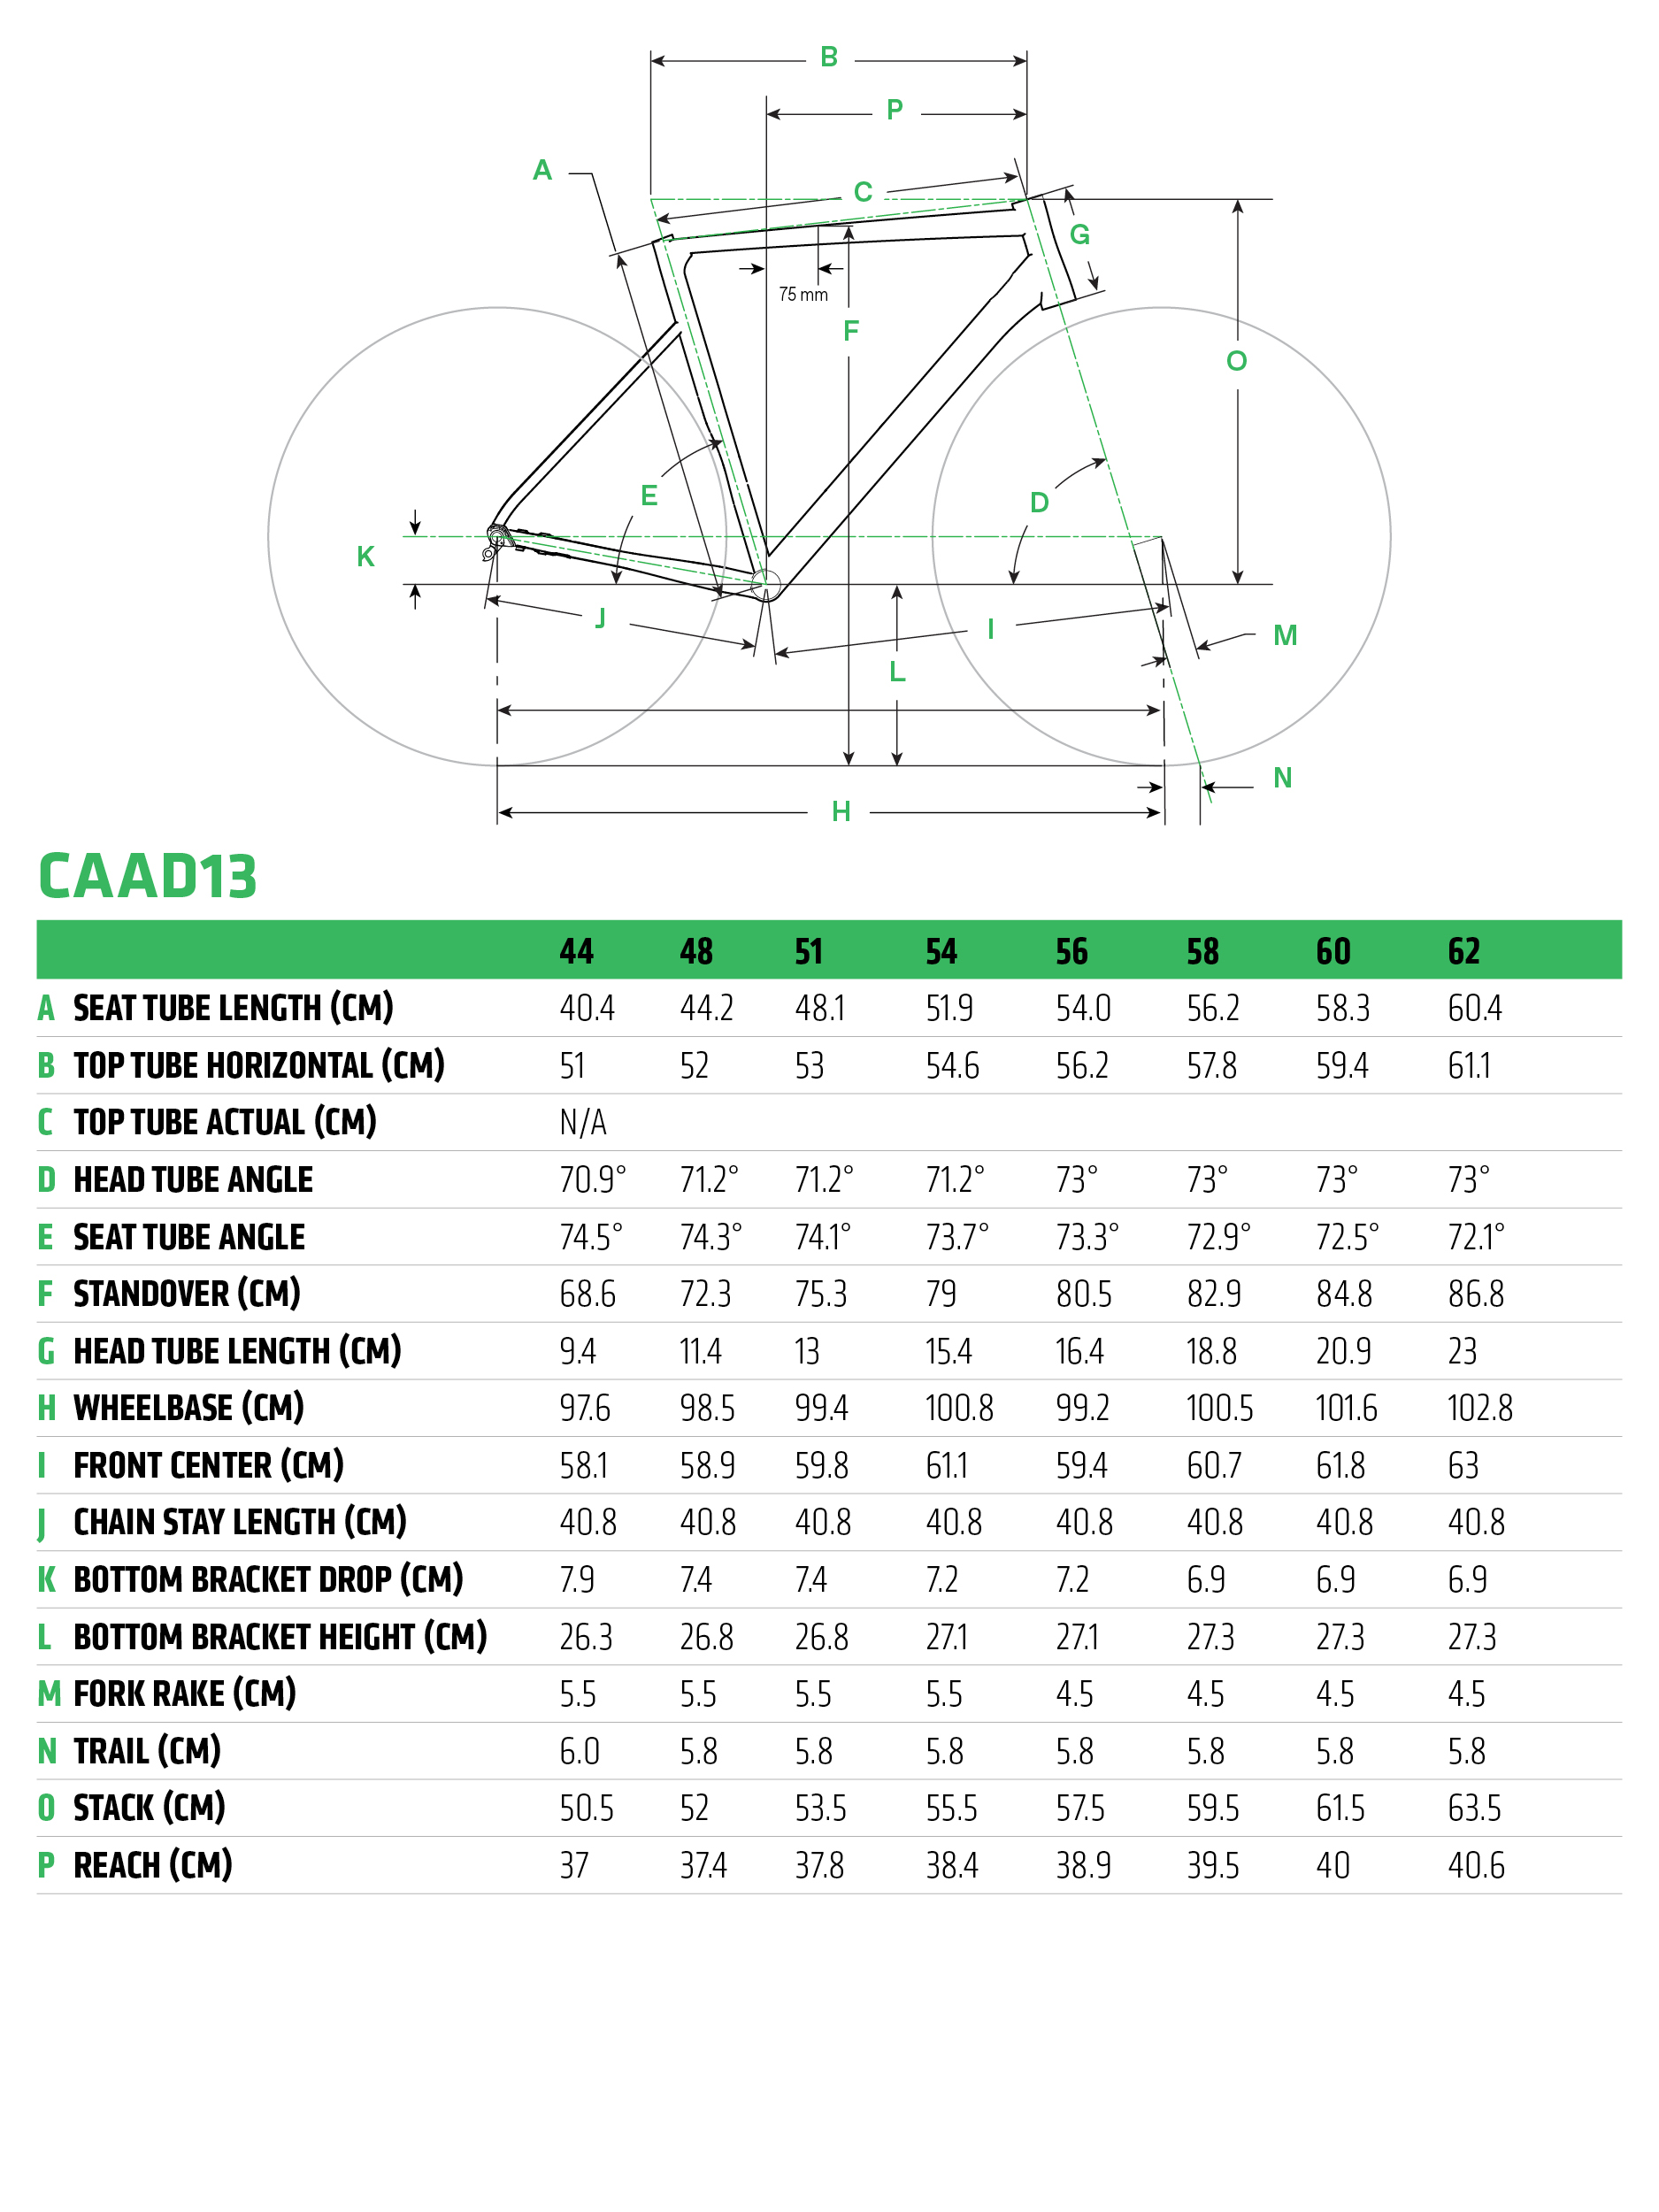 caad13 size guide